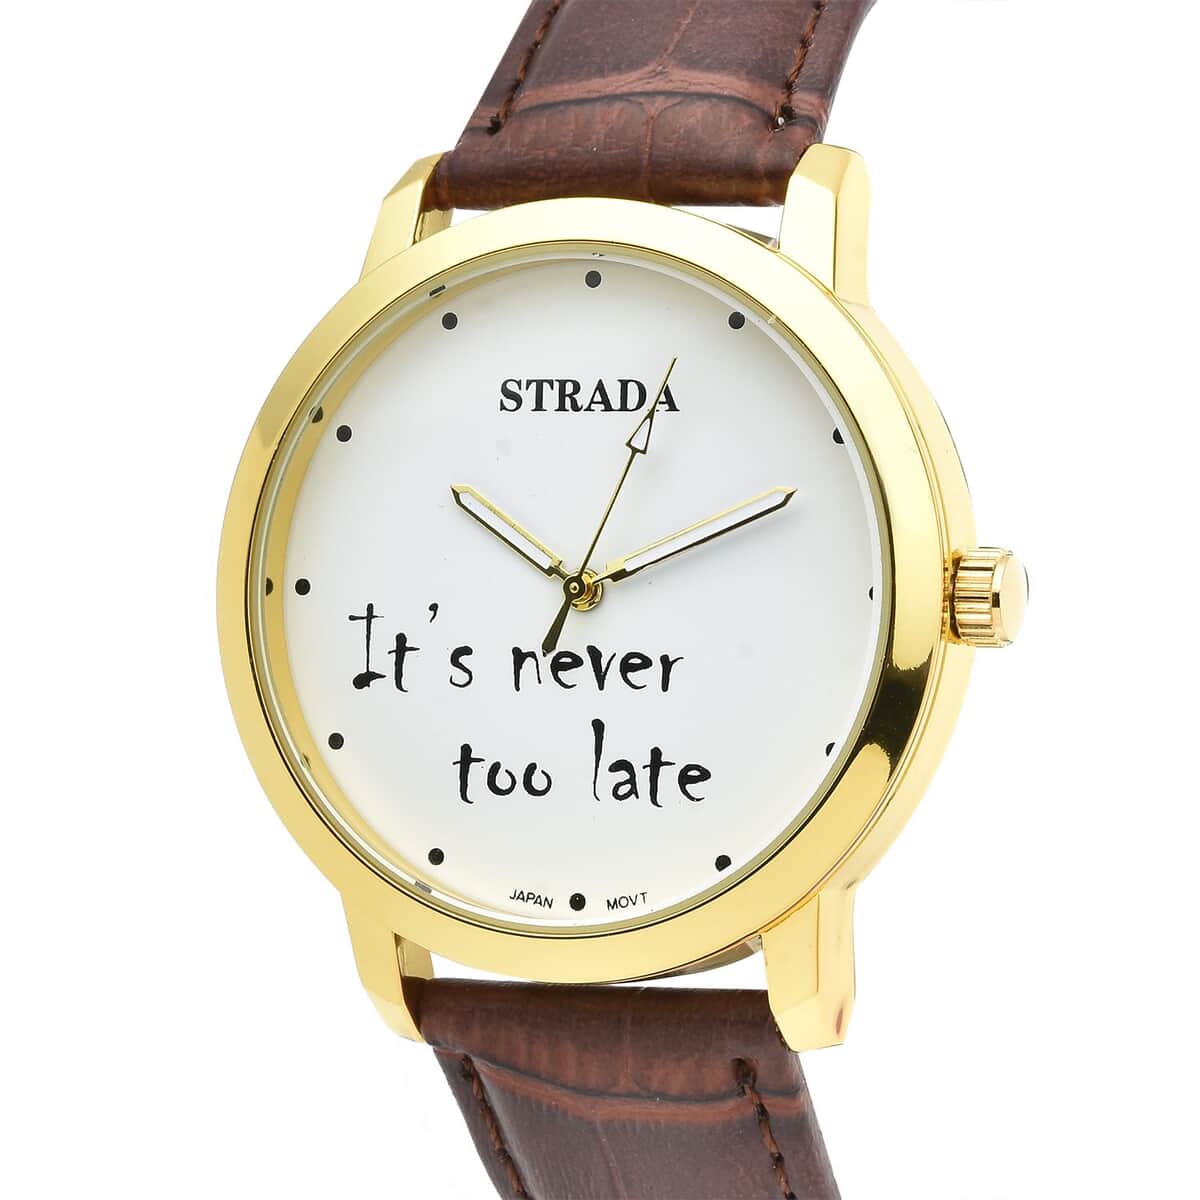 STRADA Japanese Movement Whatever I'm late anyway Dial Watch with Brown Faux Leather Strap (40.38mm) (7.5-9.0 Inch) image number 2